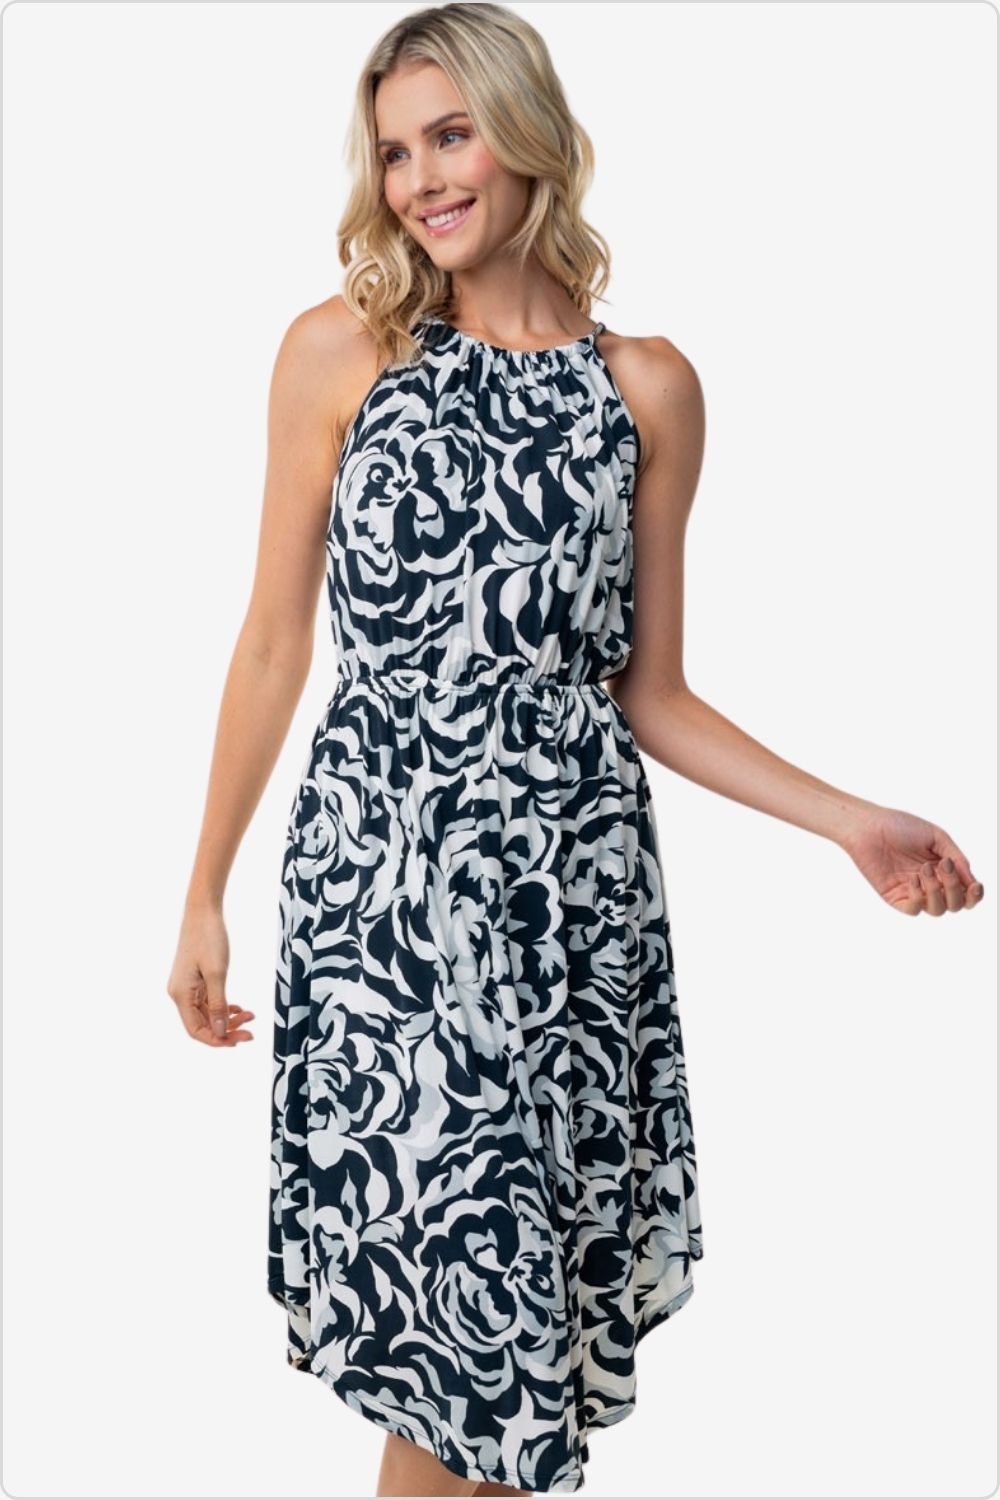 Elegant floral dress with tie back and sleeveless design, perfect for summer events, Color Black